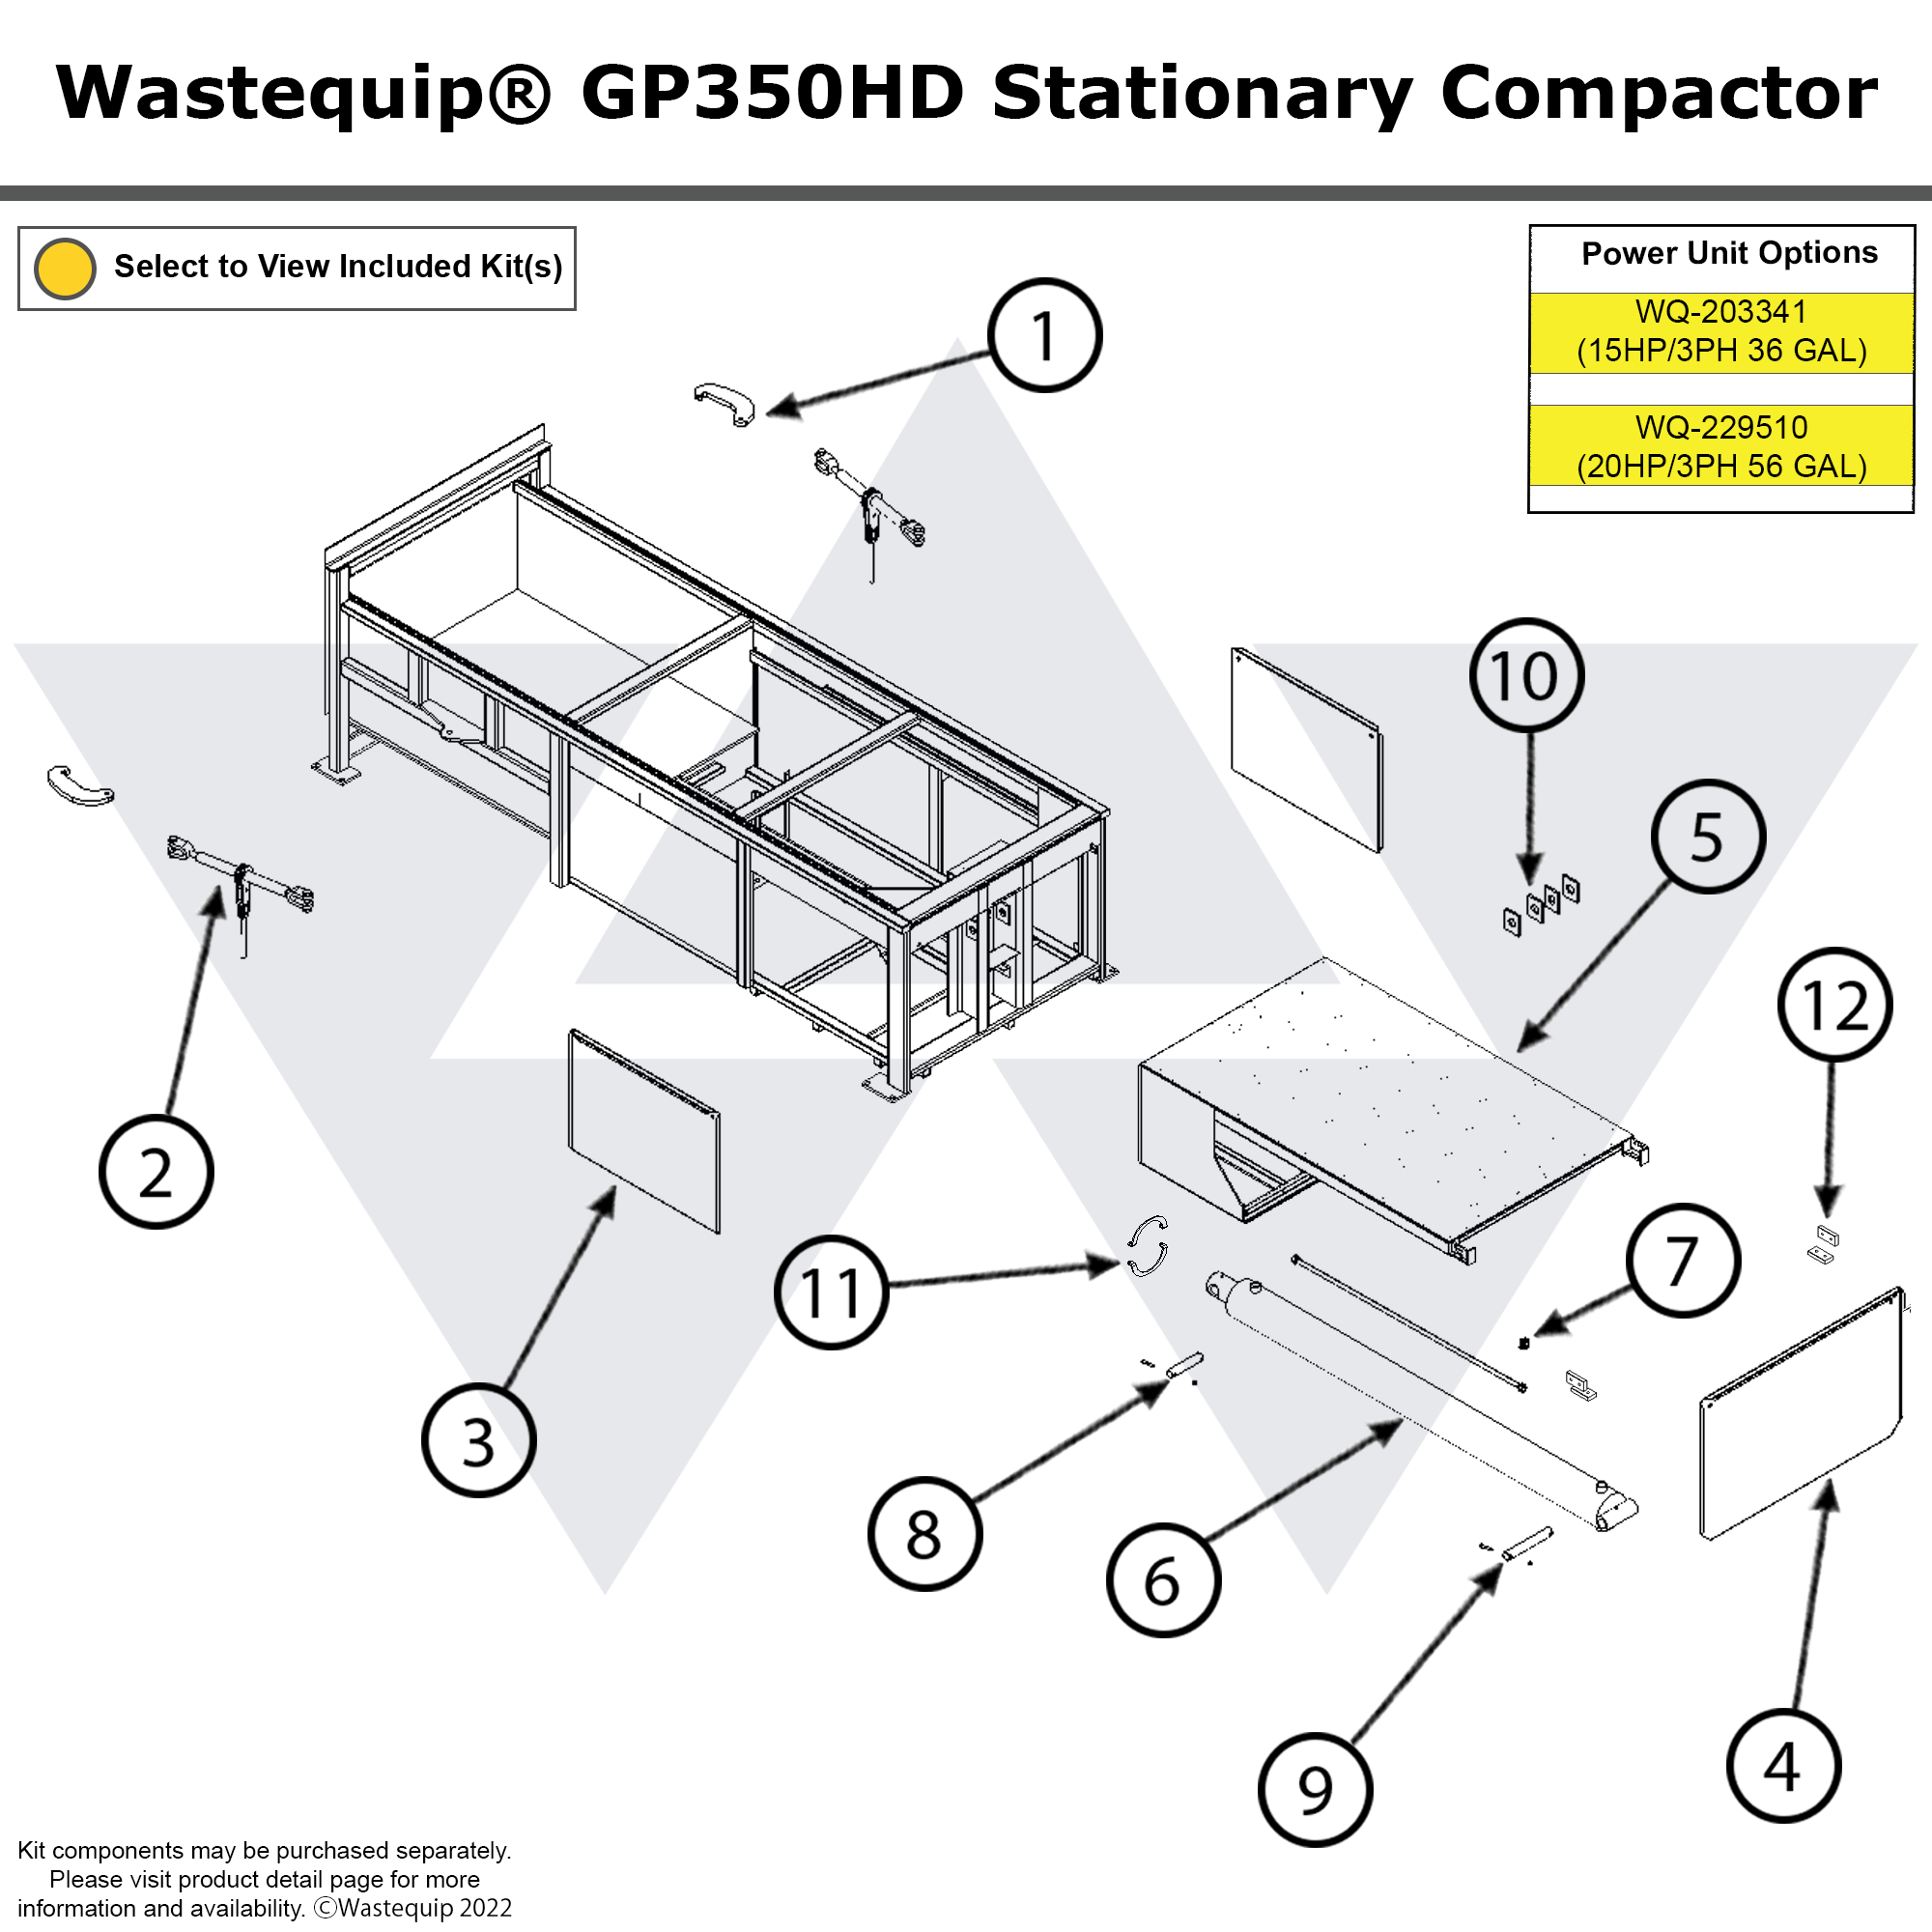 Wastequip® GP350HD Stationary Compactor